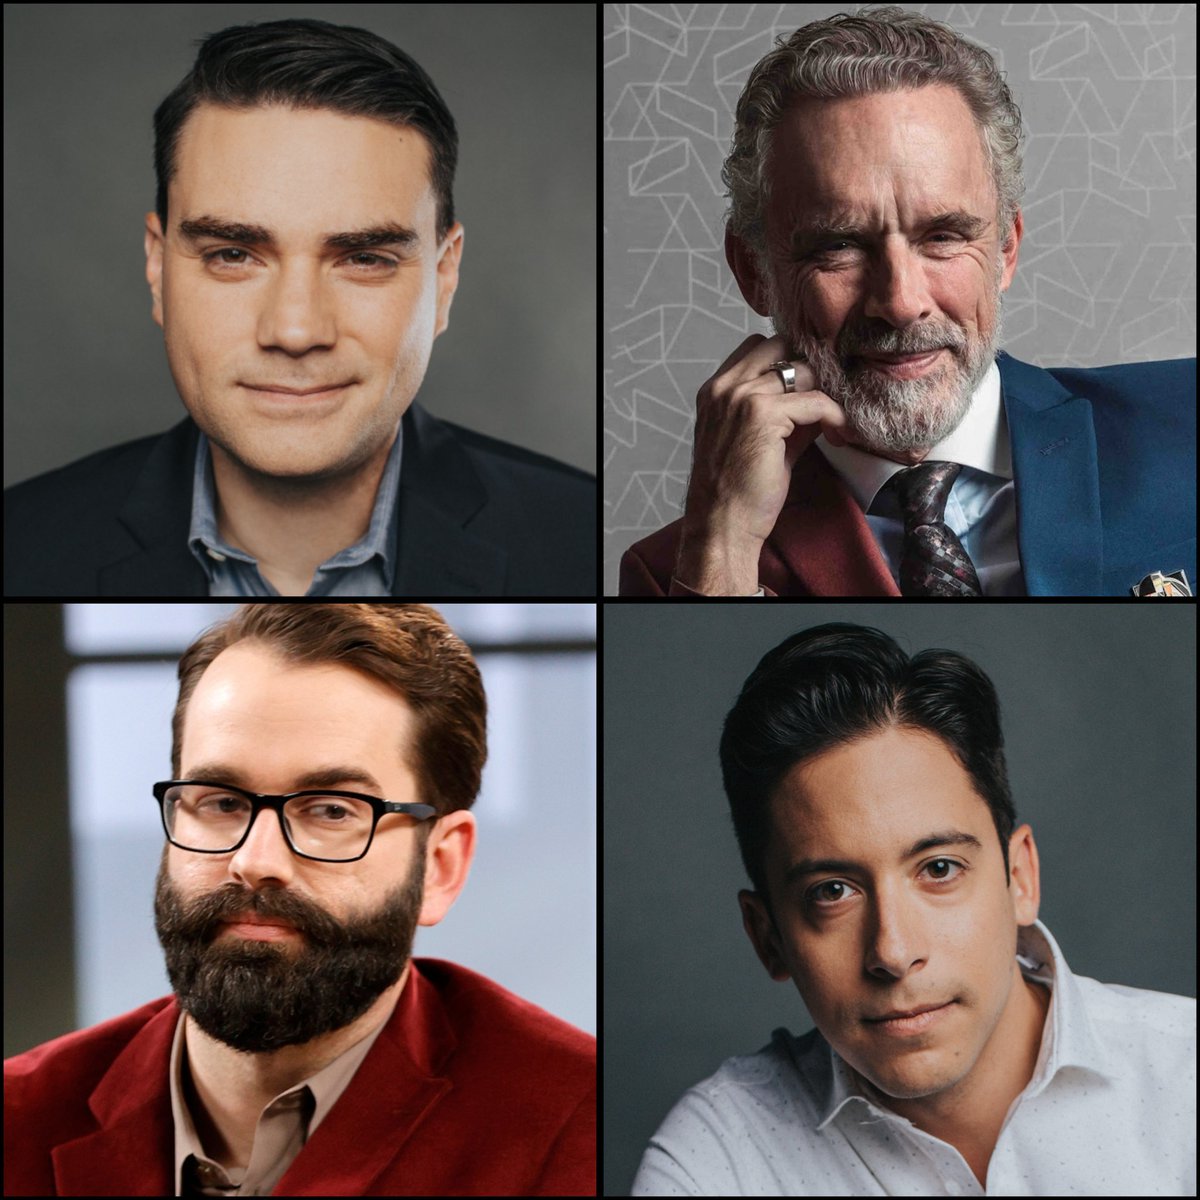 All four of you are cowards. You dislike Andrew Tate and what he does but you're quiet because you don't want to anger the fans who support him. If he was some leftist, you would be all over the case.

Hypocrites. @benshapiro @jordanbpeterson @MattWalshBlog @michaeljknowles